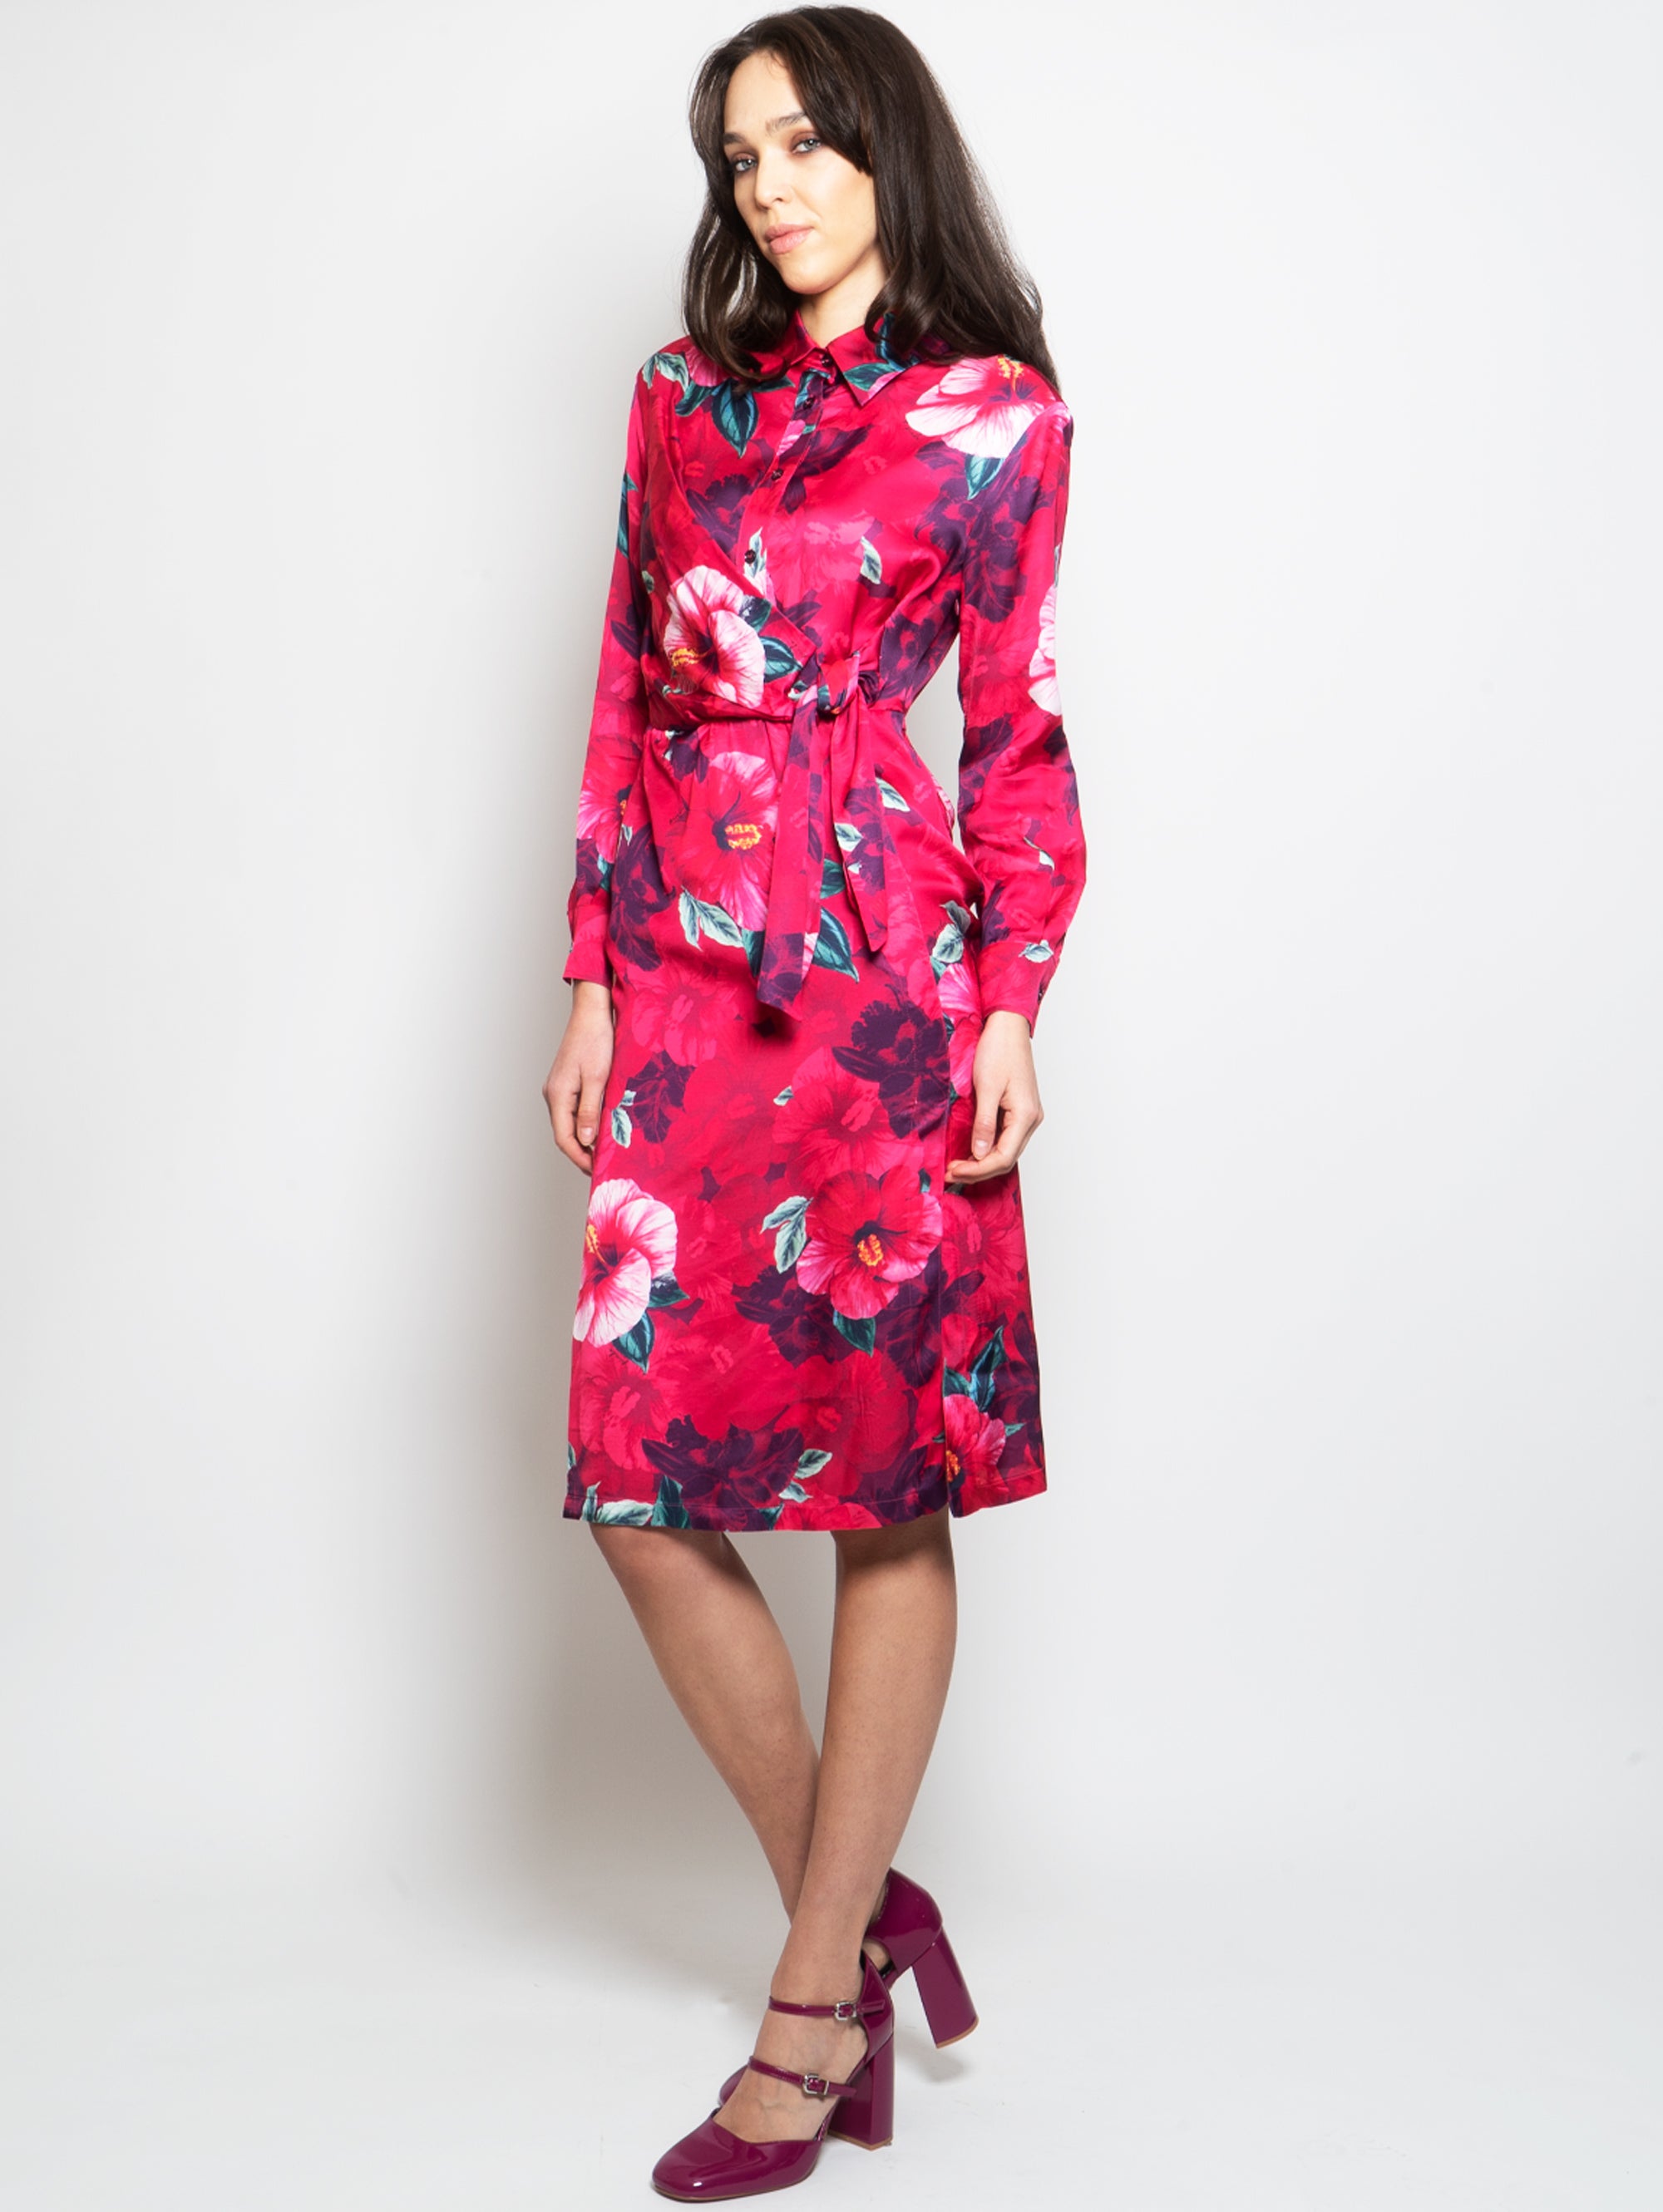 Chemisier Dress with Fuchsia Floral Print